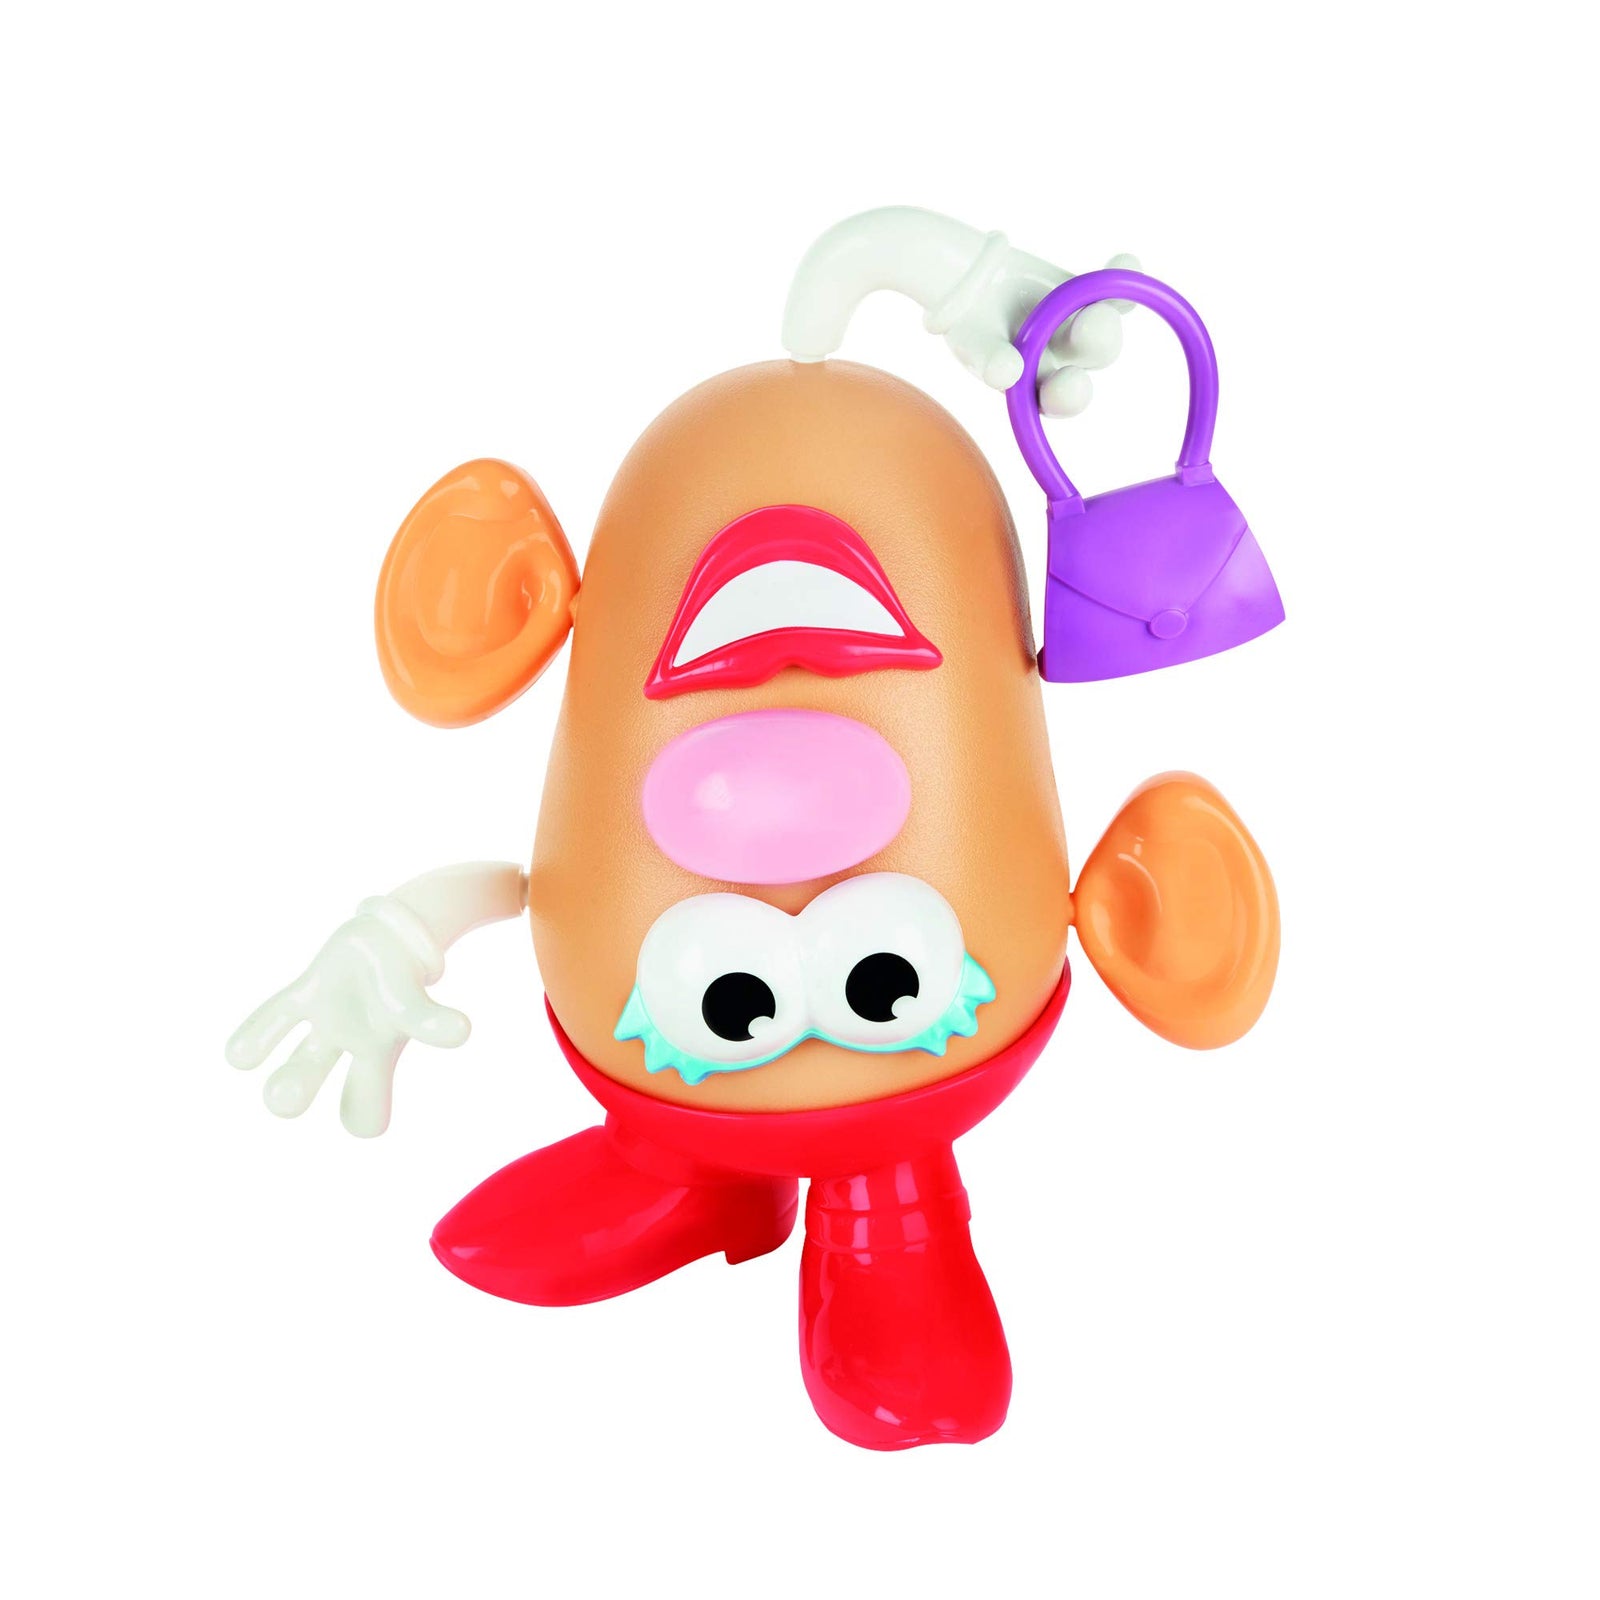 Playskool Mrs. Potato Head Silly Suitcase Parts And Pieces Toddler Toy For Kids (Amazon Exclusive)